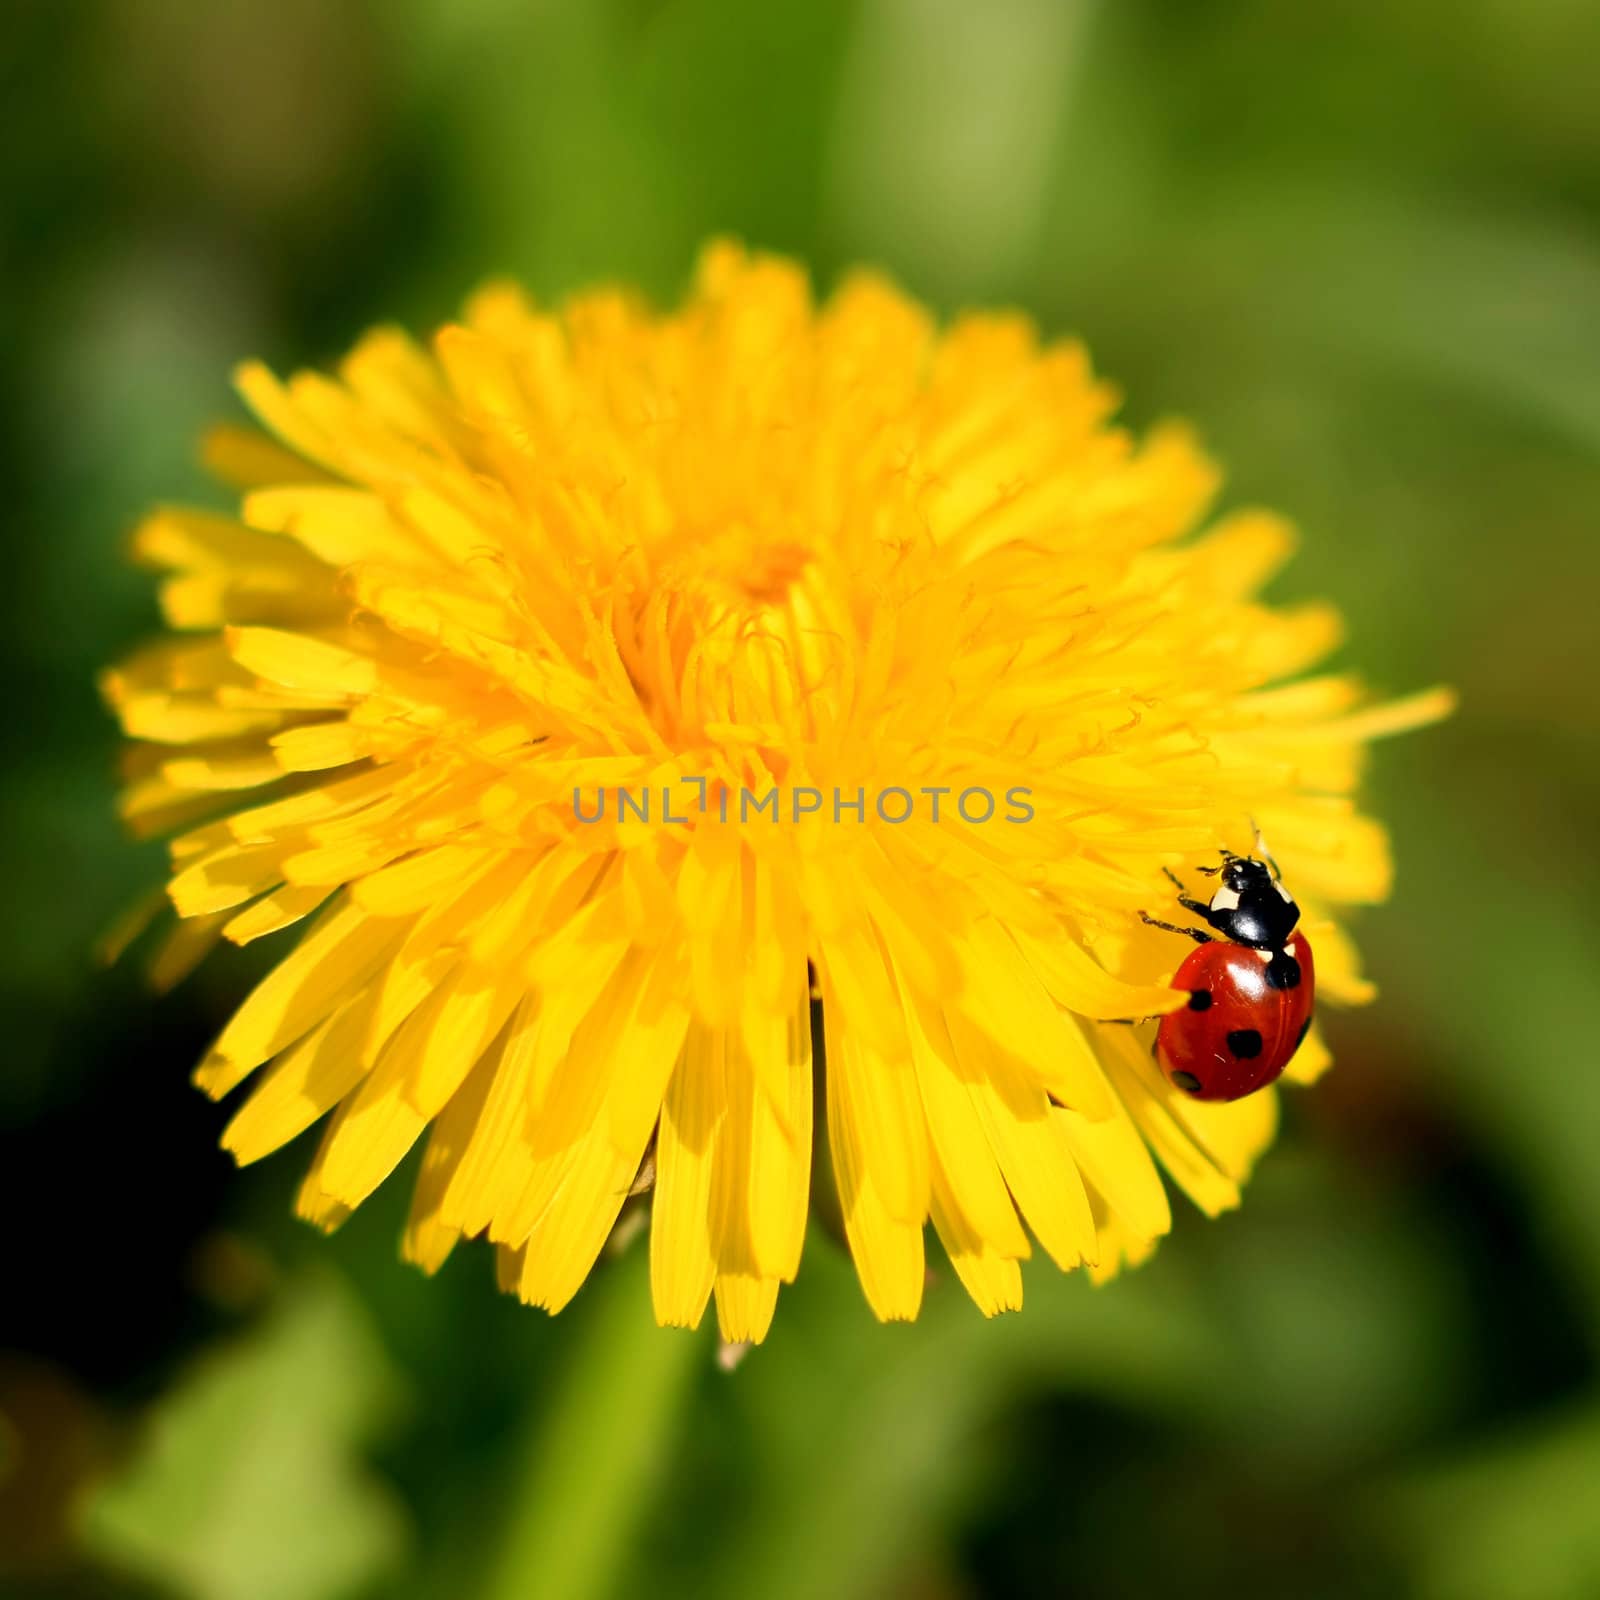 Ladybug on a Yellow Flower by monner